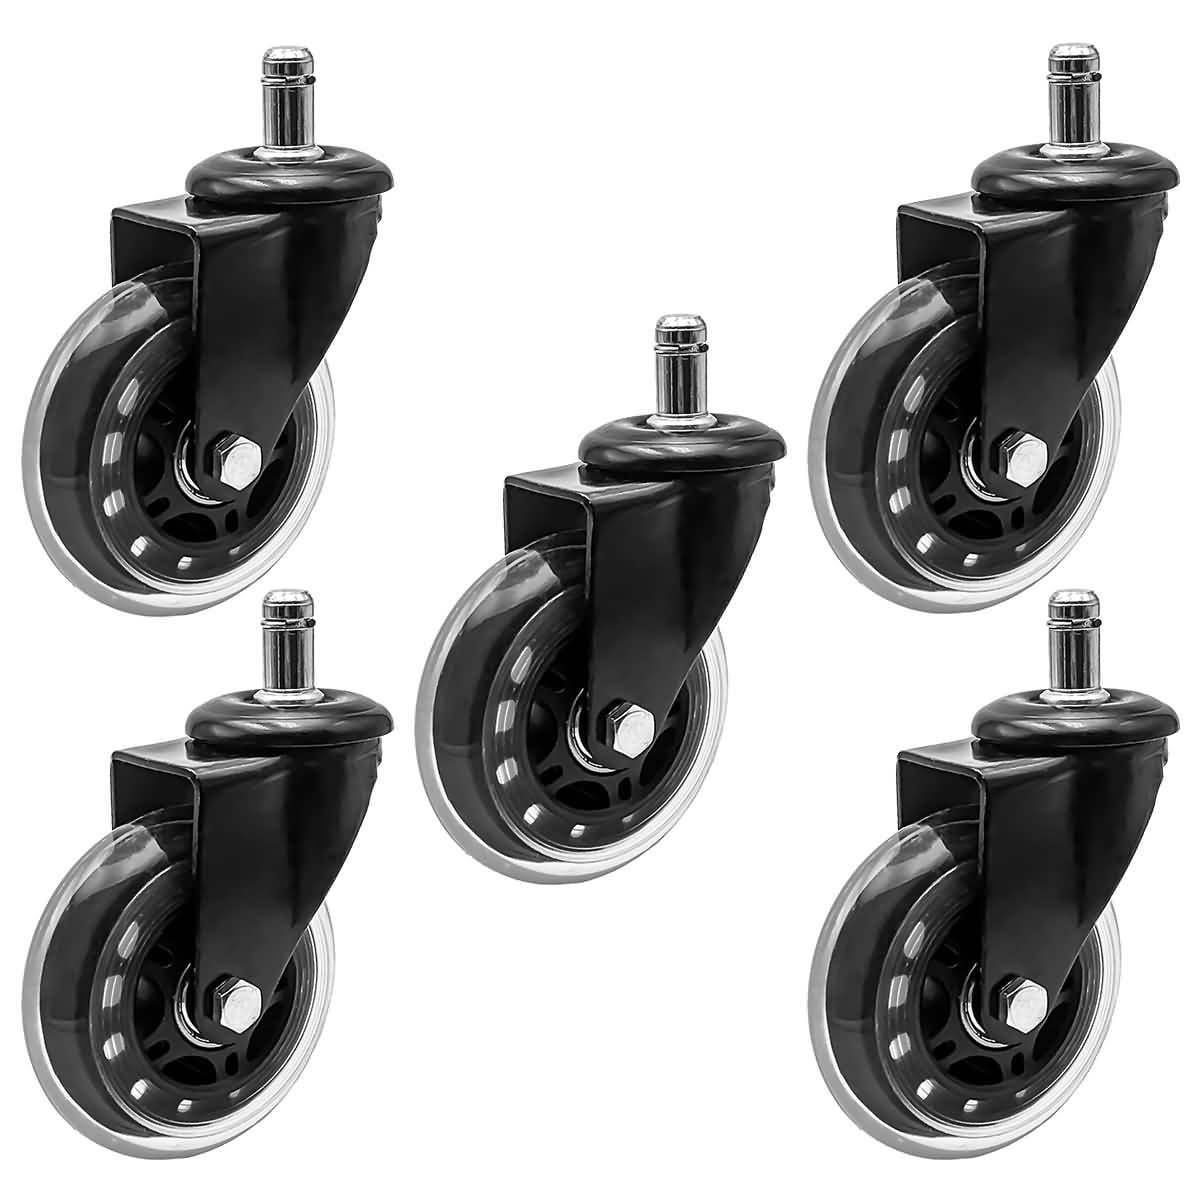 M12, Moving Caster Wheels Trolley Wheels Polyurethane Swivel Castor Wheel,Trolley Furniture Caster,Caster with Brakes,Universal 360 Degree Rotating,con Threaded Rod,Protect Your Carpet/Hardwood,4 Pcs 